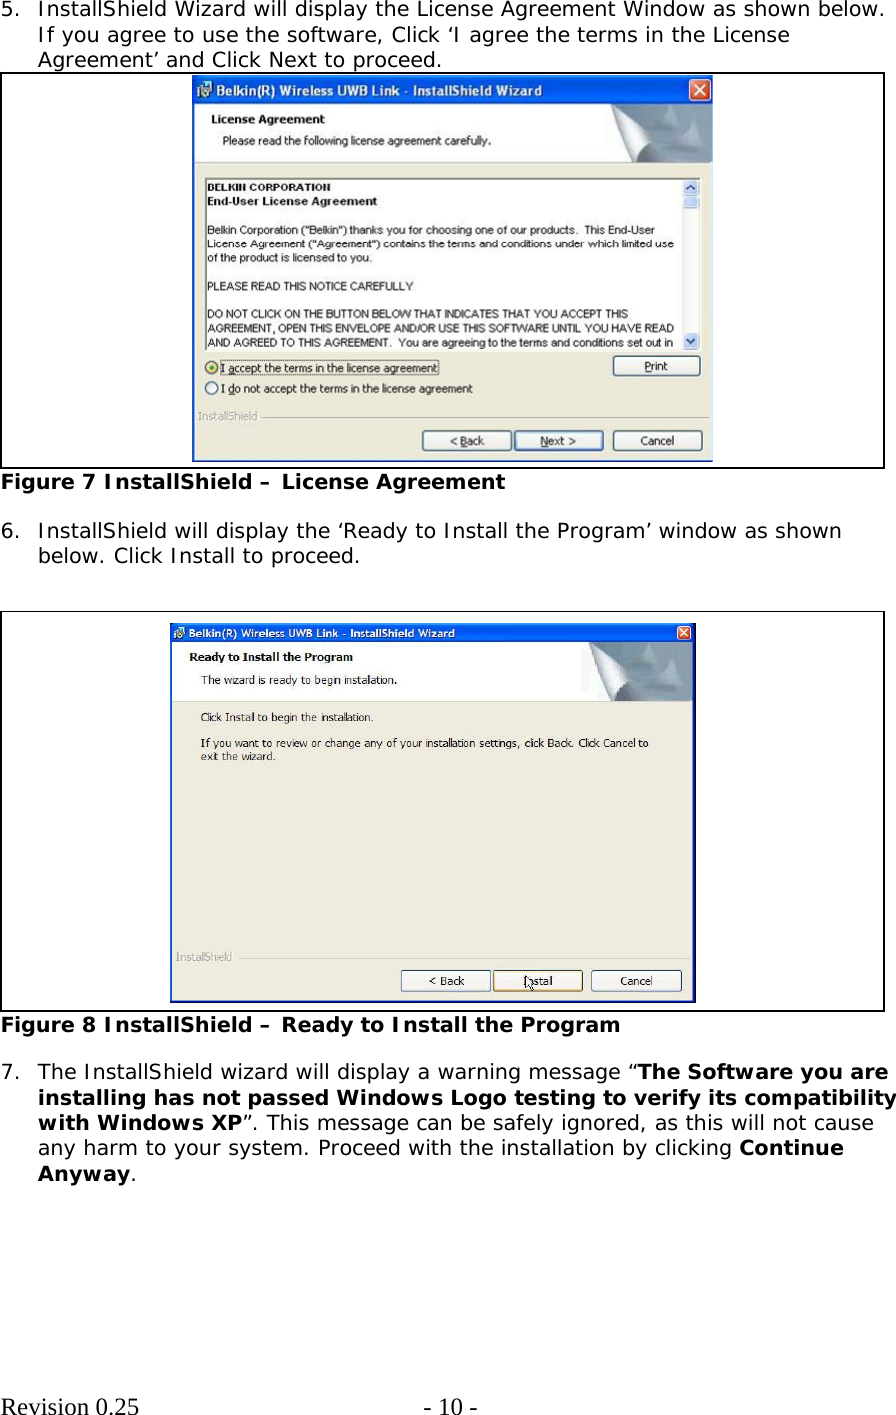        Revision 0.25  - 10 -     5. InstallShield Wizard will display the License Agreement Window as shown below. If you agree to use the software, Click ‘I agree the terms in the License Agreement’ and Click Next to proceed.  Figure 7 InstallShield – License Agreement  6. InstallShield will display the ‘Ready to Install the Program’ window as shown below. Click Install to proceed.    Figure 8 InstallShield – Ready to Install the Program  7. The InstallShield wizard will display a warning message “The Software you are installing has not passed Windows Logo testing to verify its compatibility with Windows XP”. This message can be safely ignored, as this will not cause any harm to your system. Proceed with the installation by clicking Continue Anyway.  